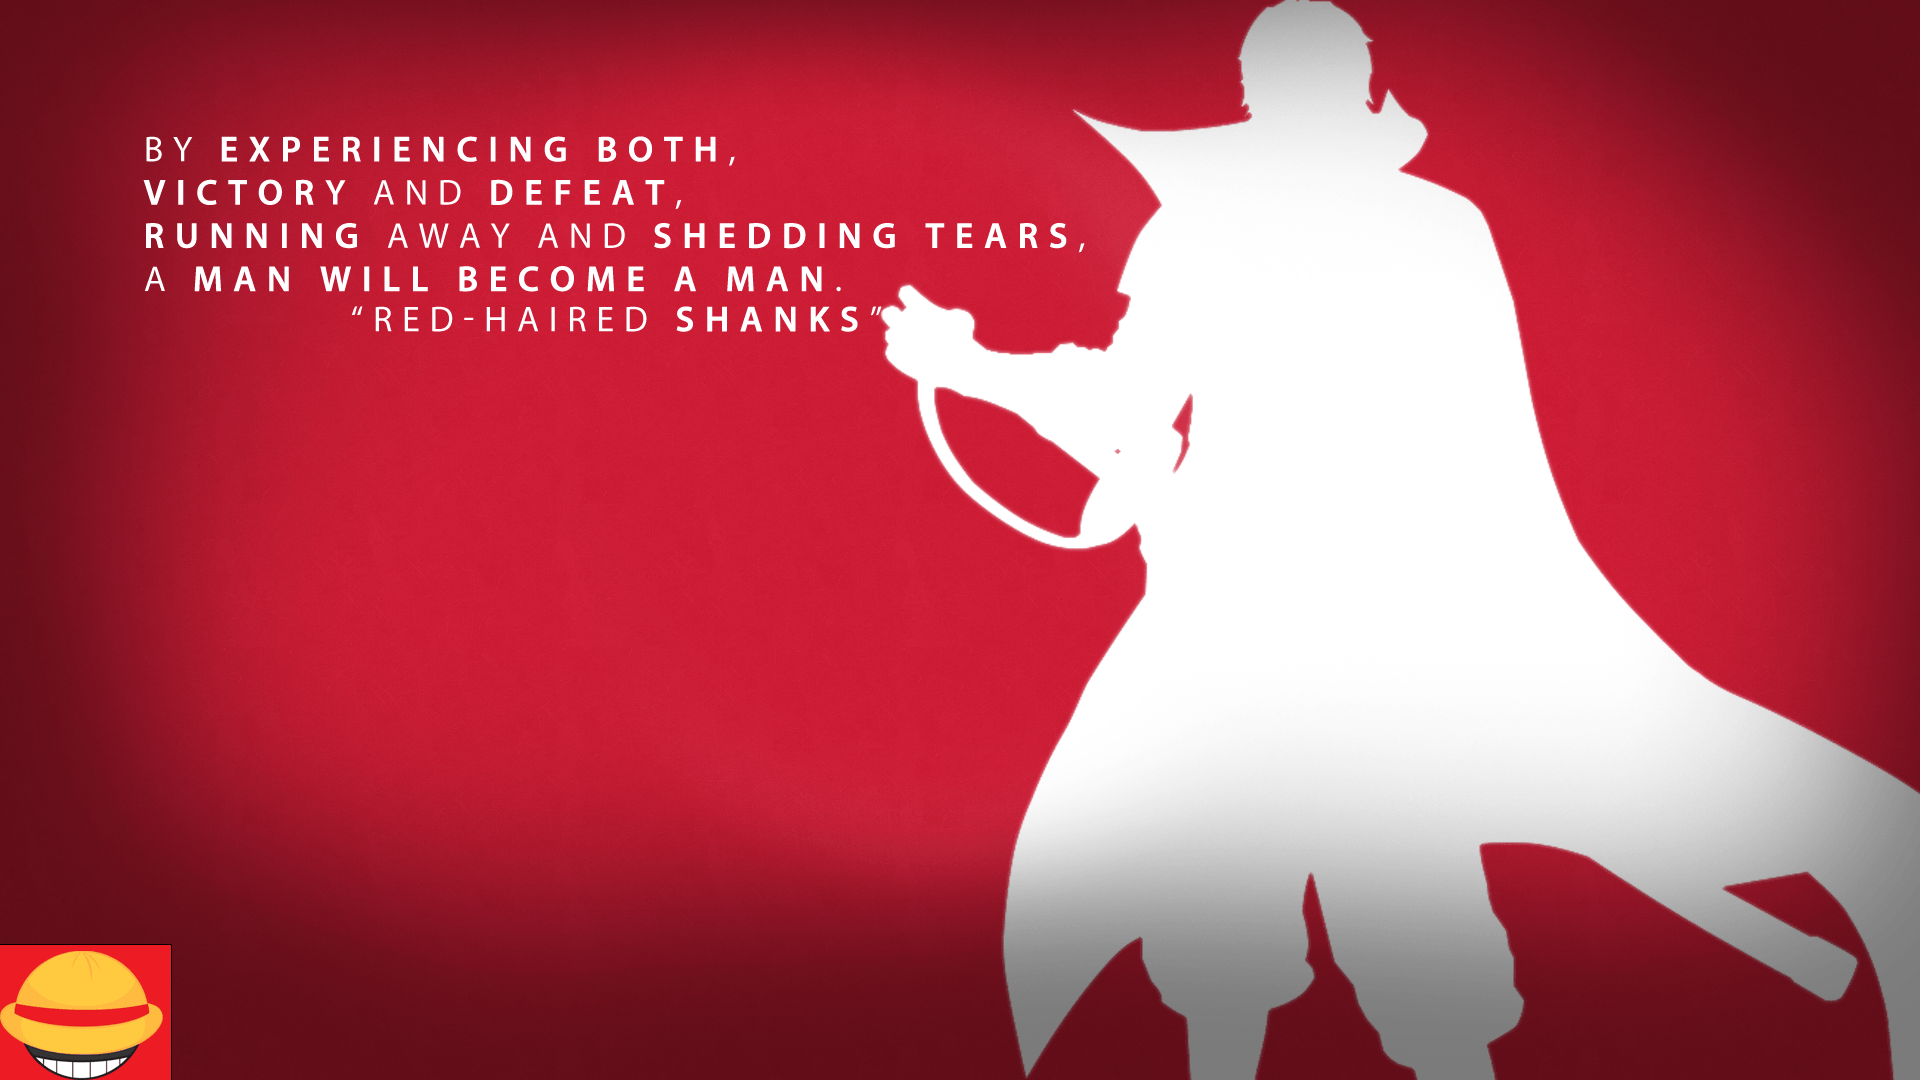 Red haired shanks quote Full HD Wallpaper